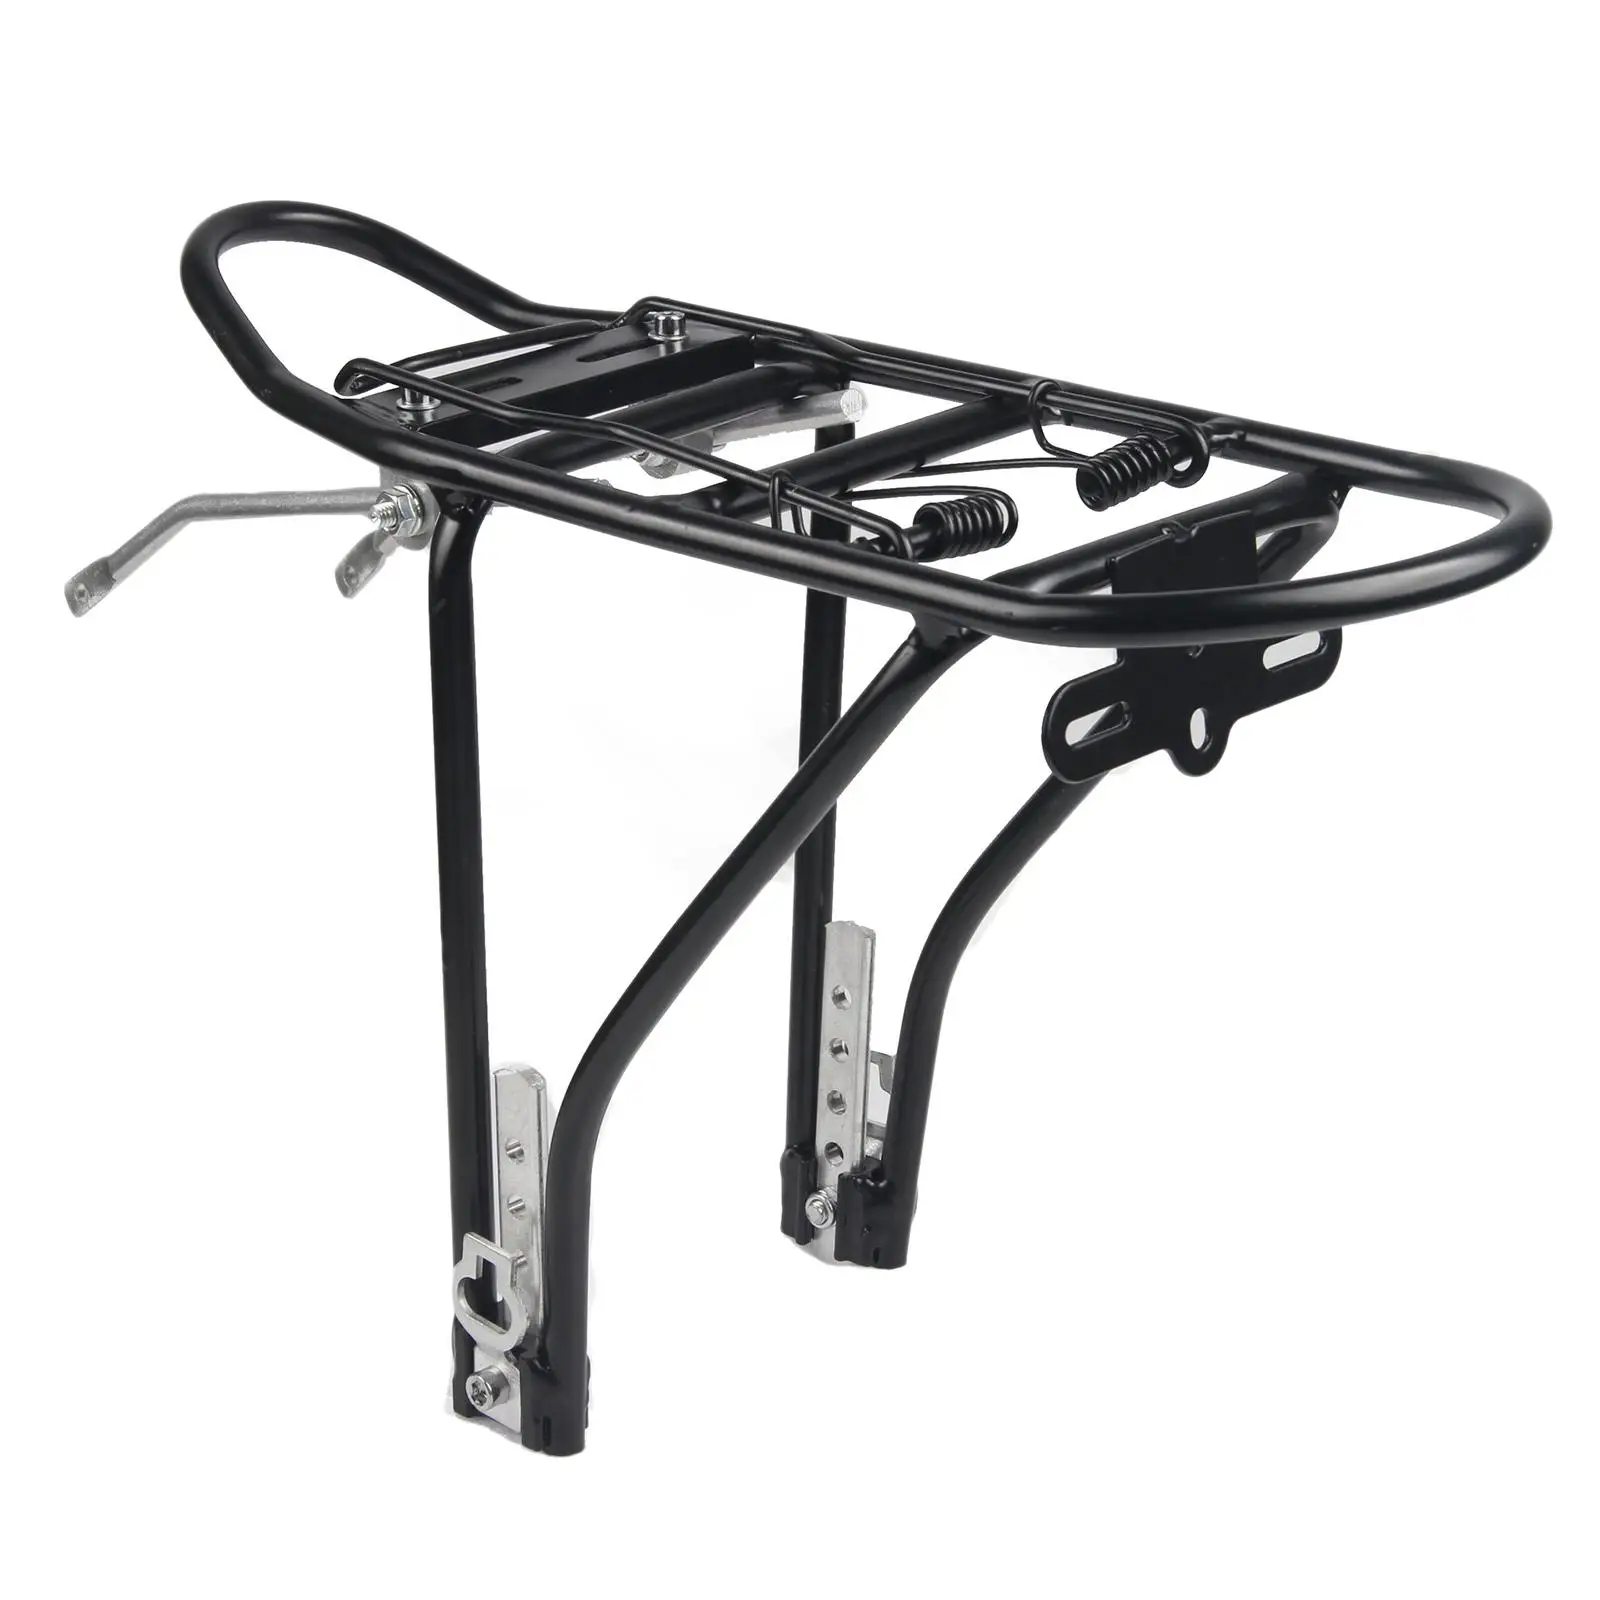 Bicycle Rear Luggage Cargo Rack Panniers Alloy Carrier for Parts Load Limit 88 lbs/40kg Suitable for 14